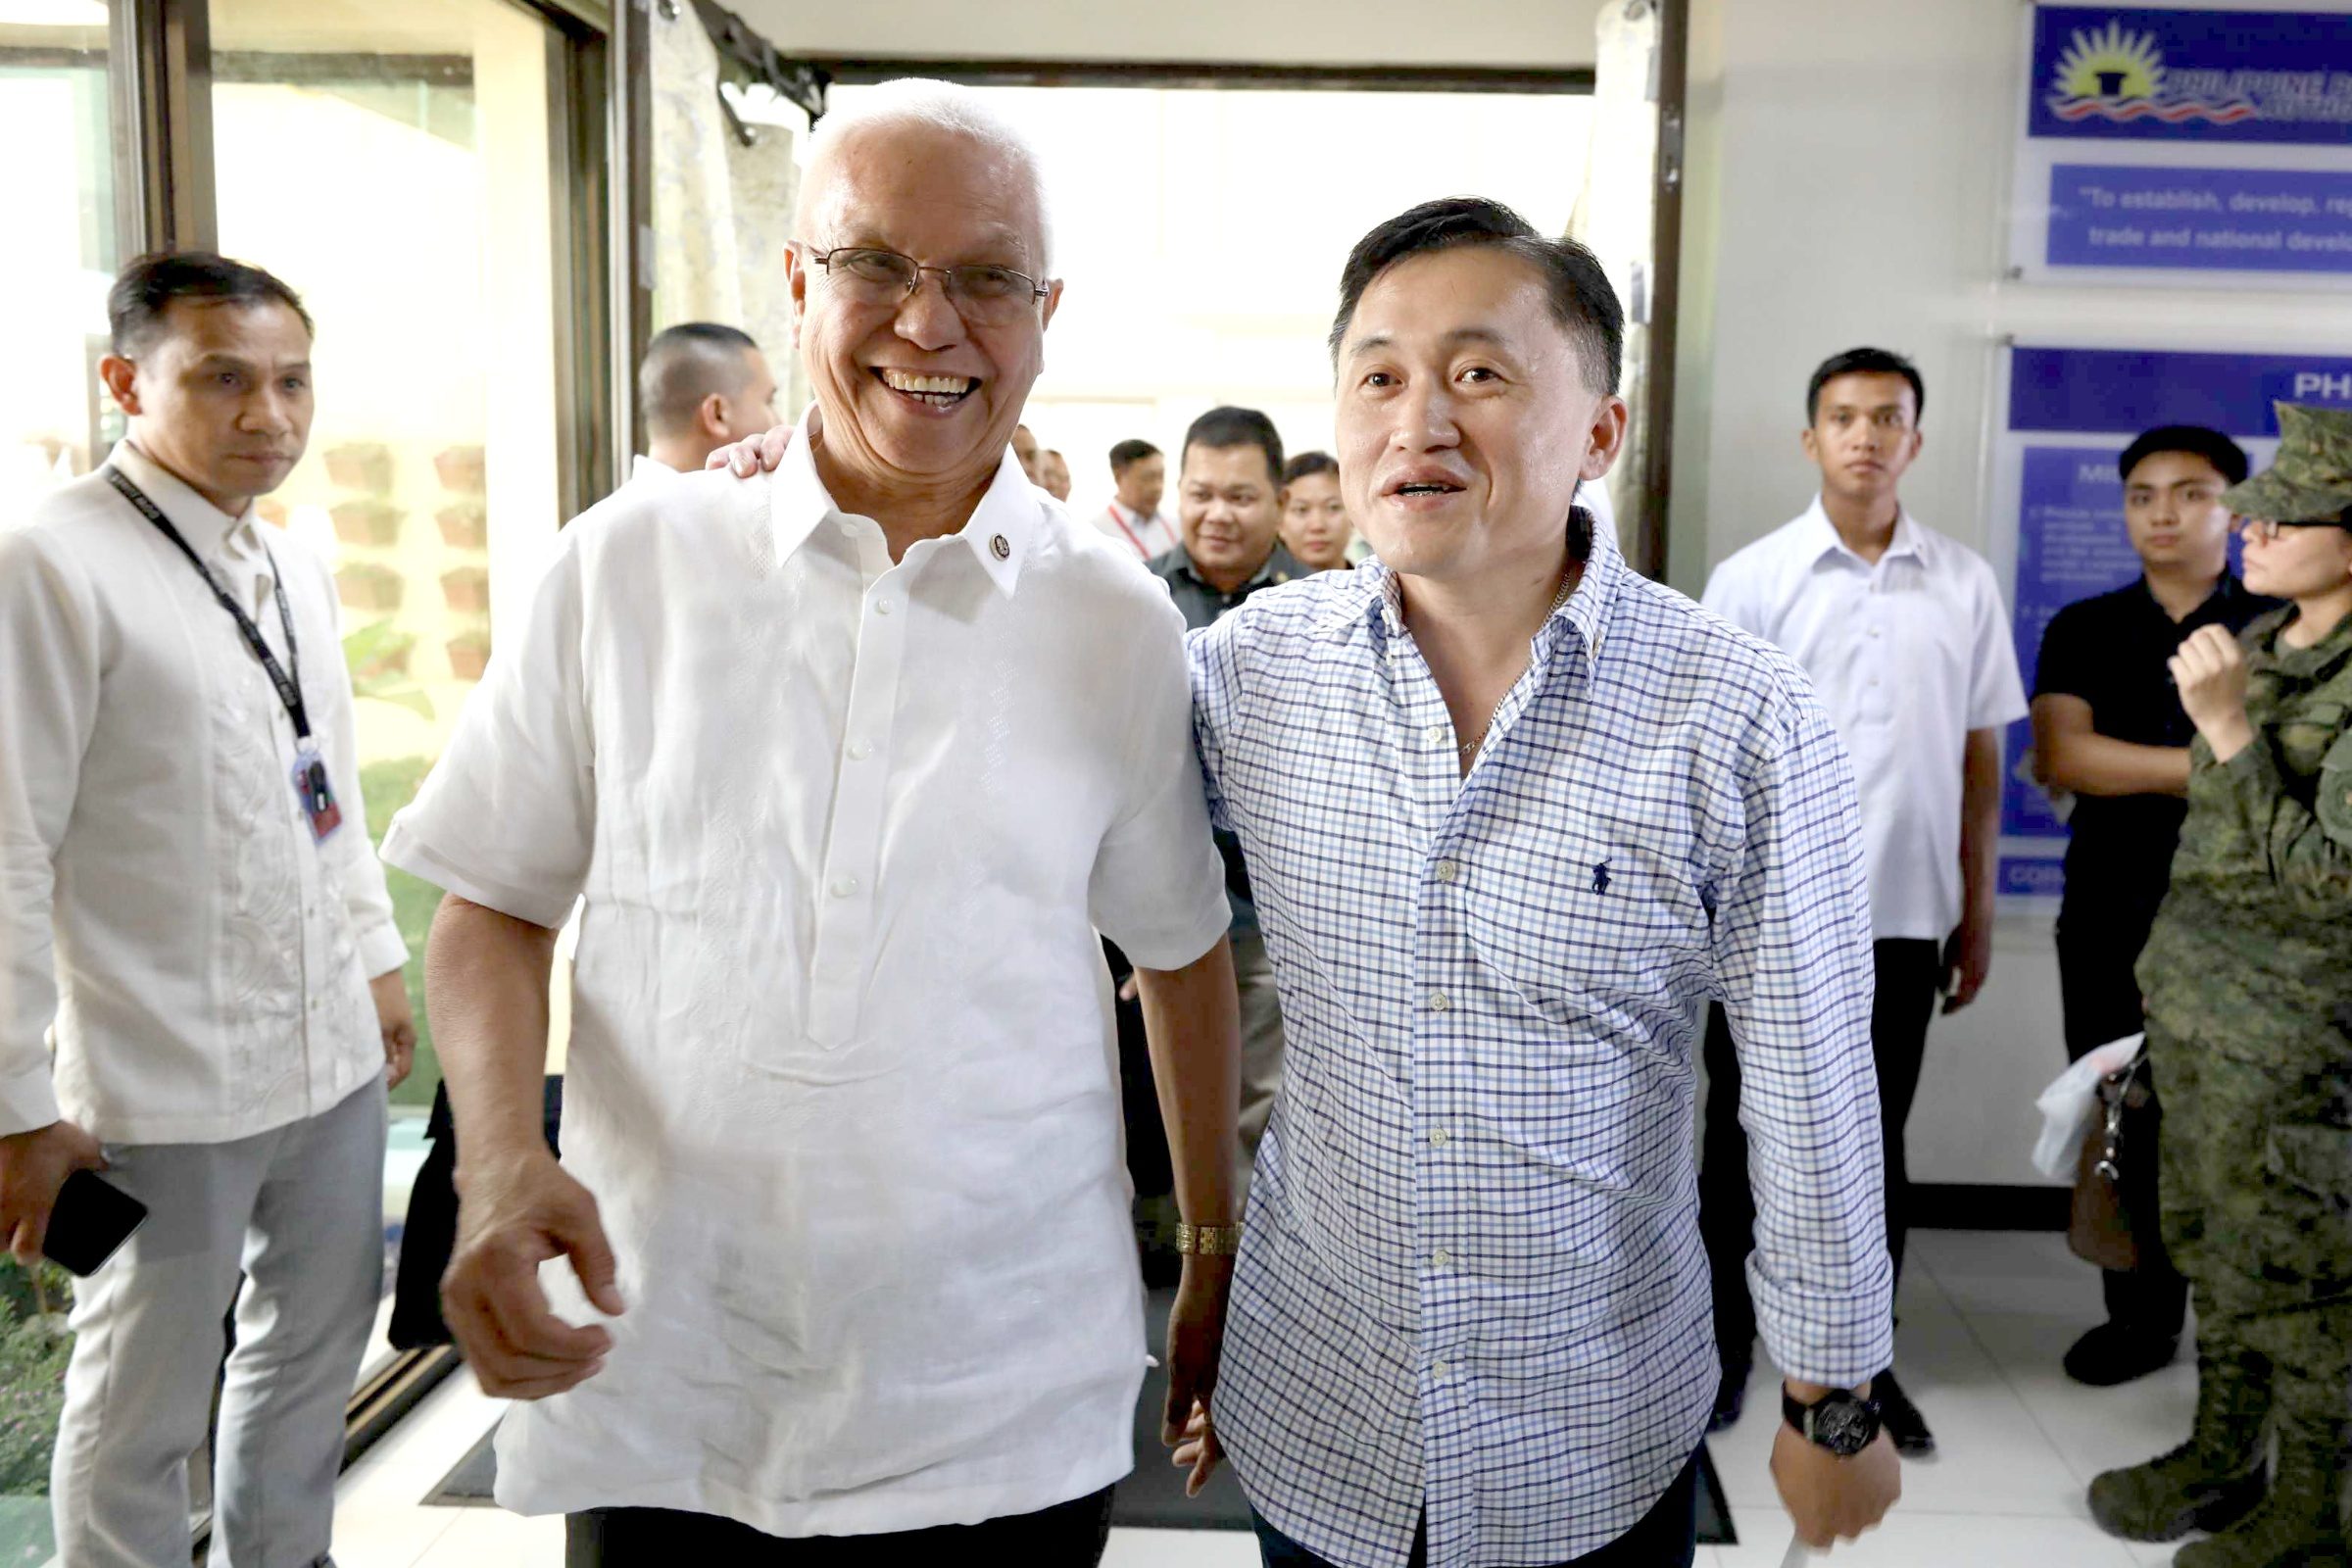 After Evasco, Go meeting, will NFA issue be resolved soon?